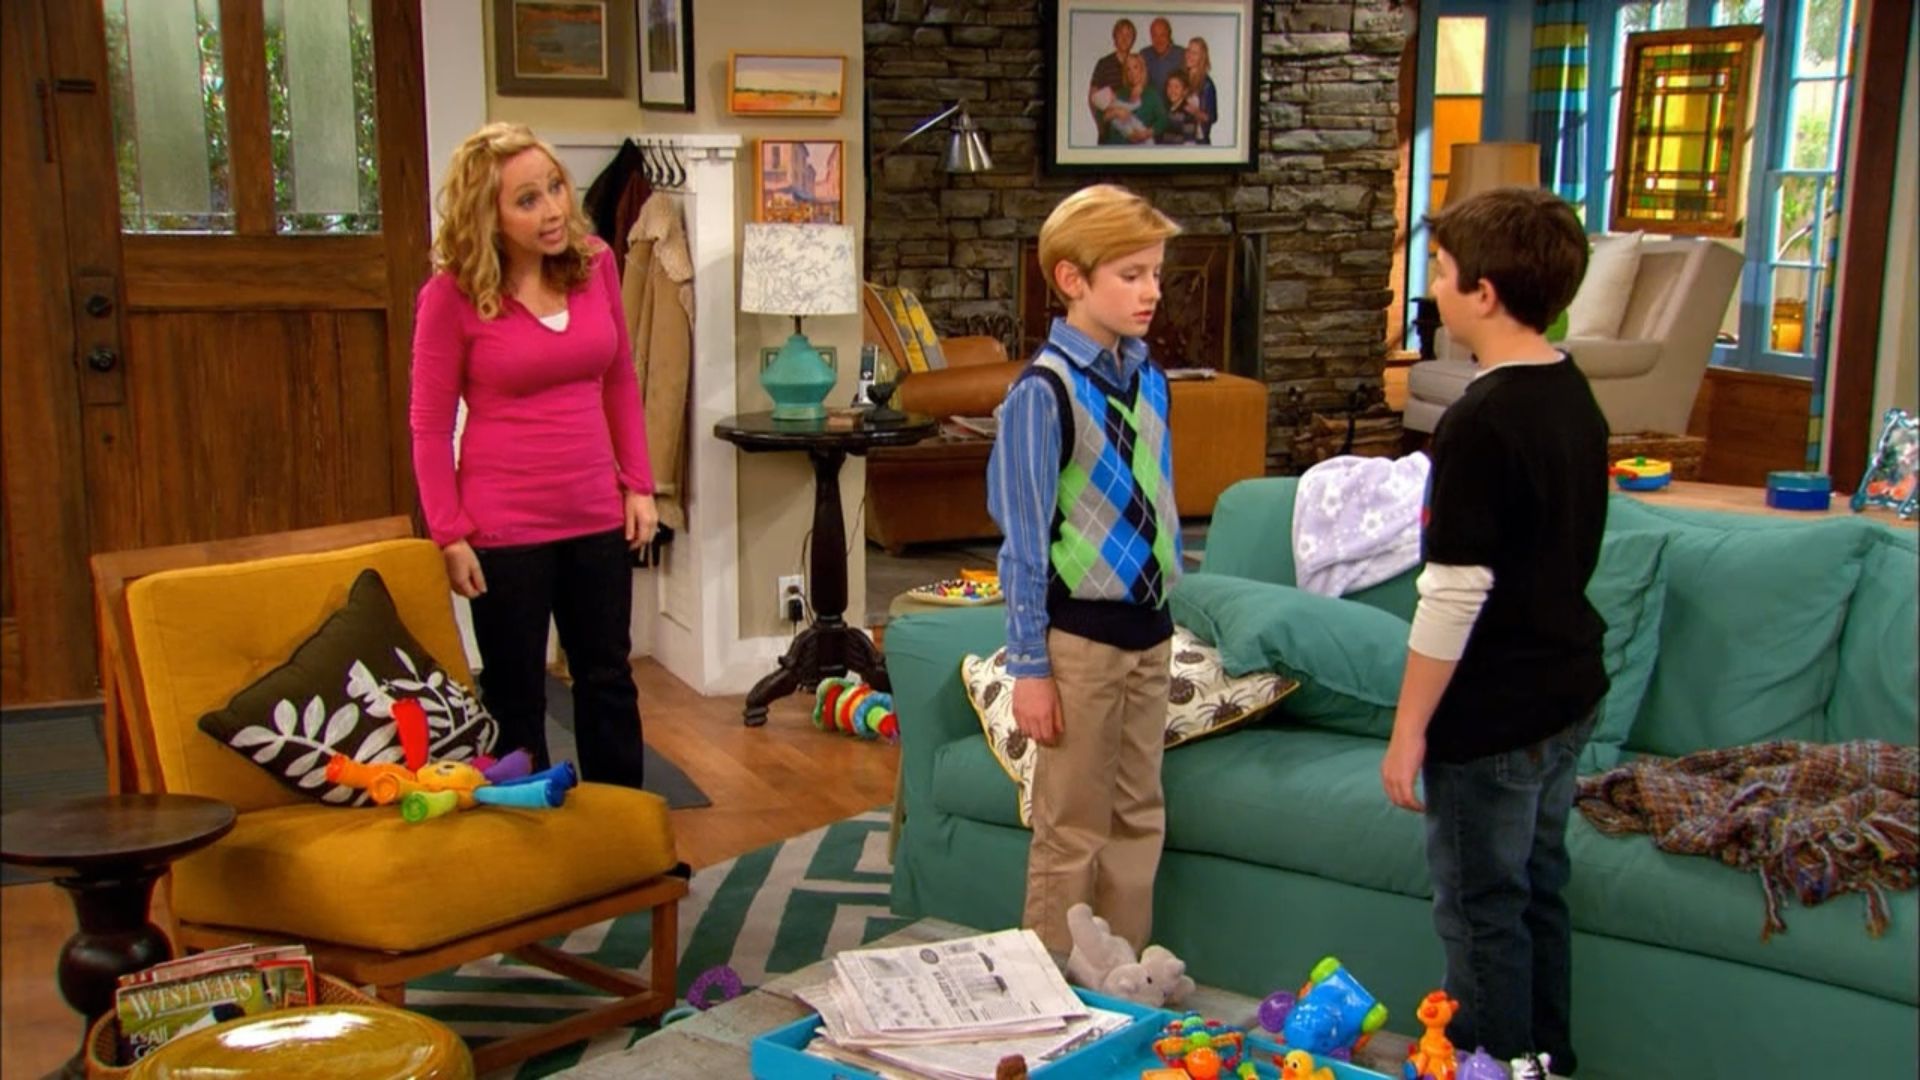 Nathan Gamble in Good Luck Charlie, episode: Teddy Rebounds